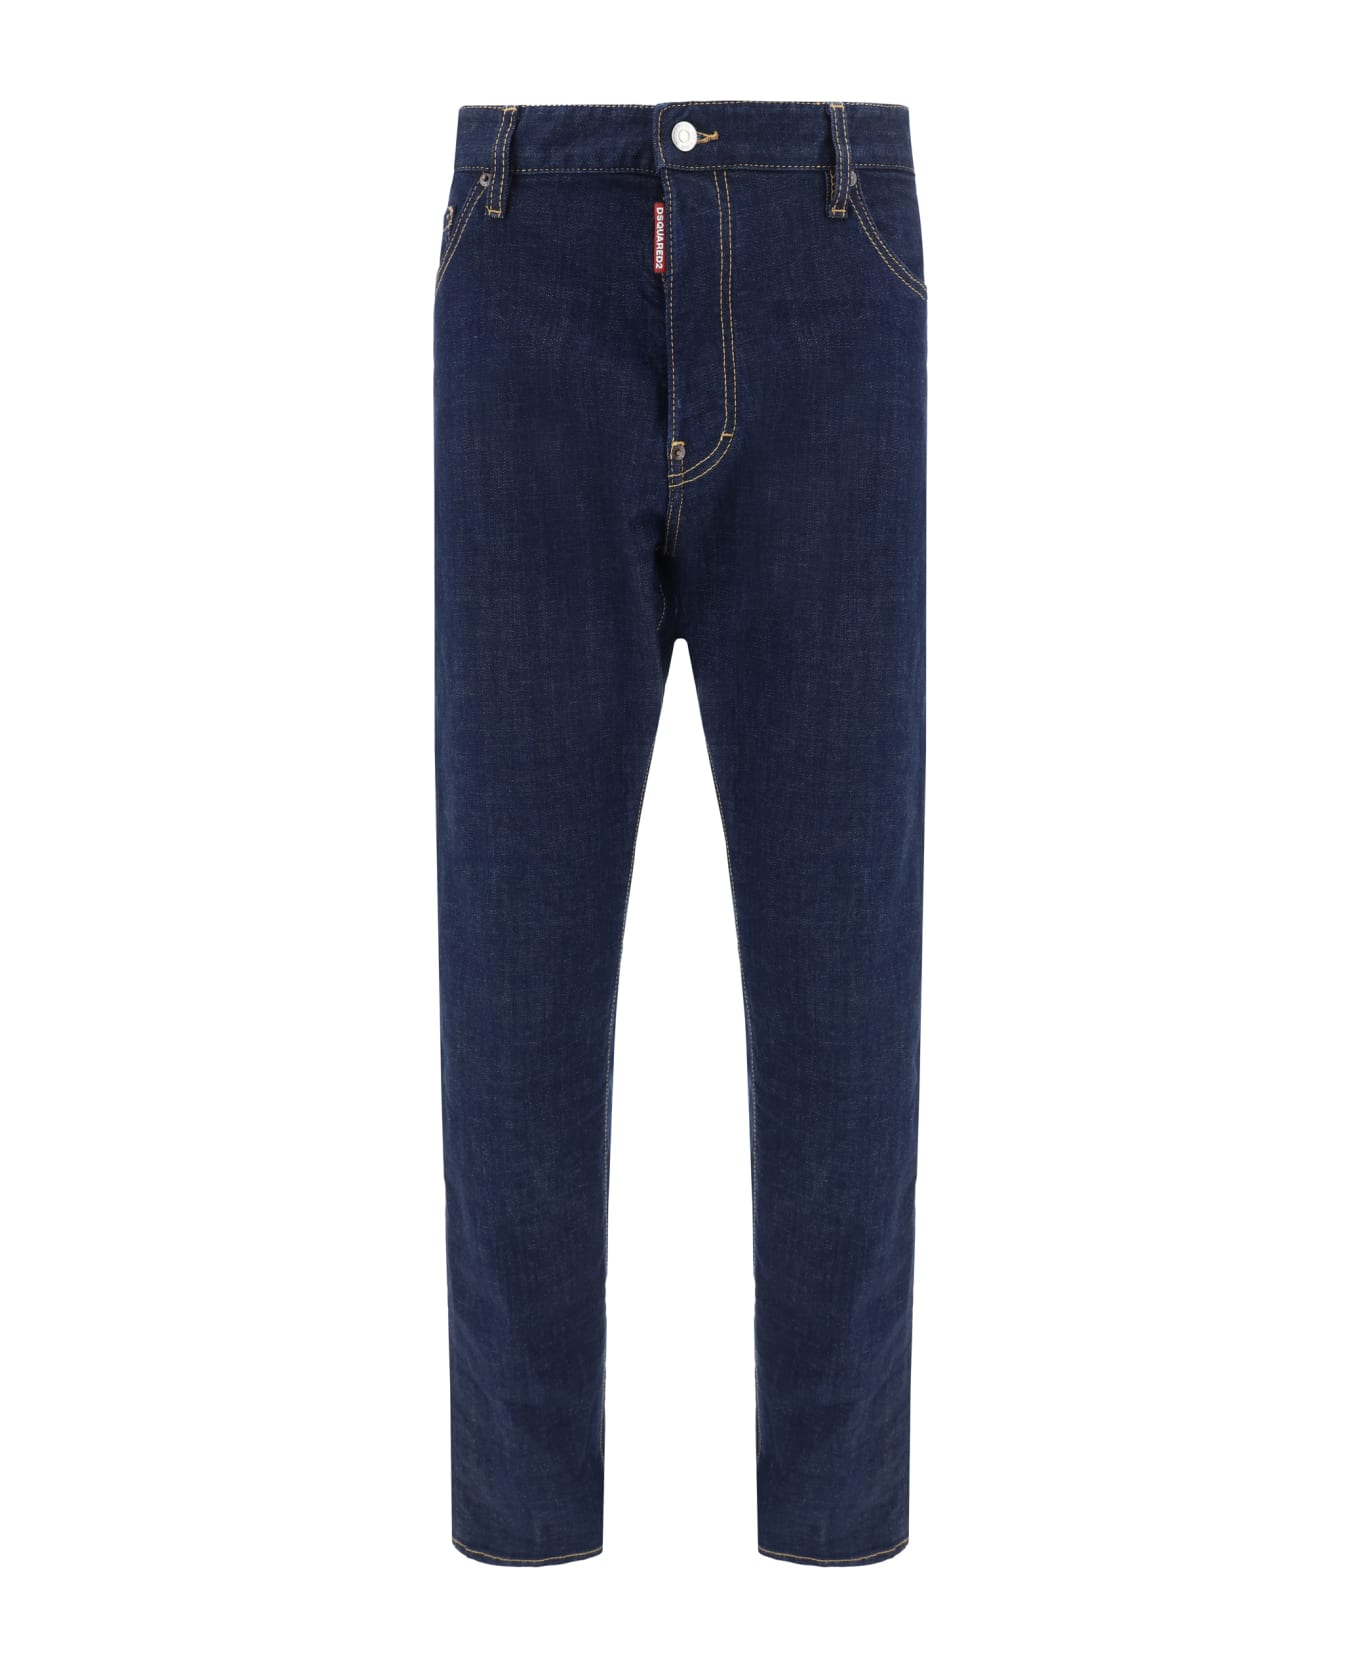 Dsquared2 Cool Guy Jeans - Navy Blue デニム